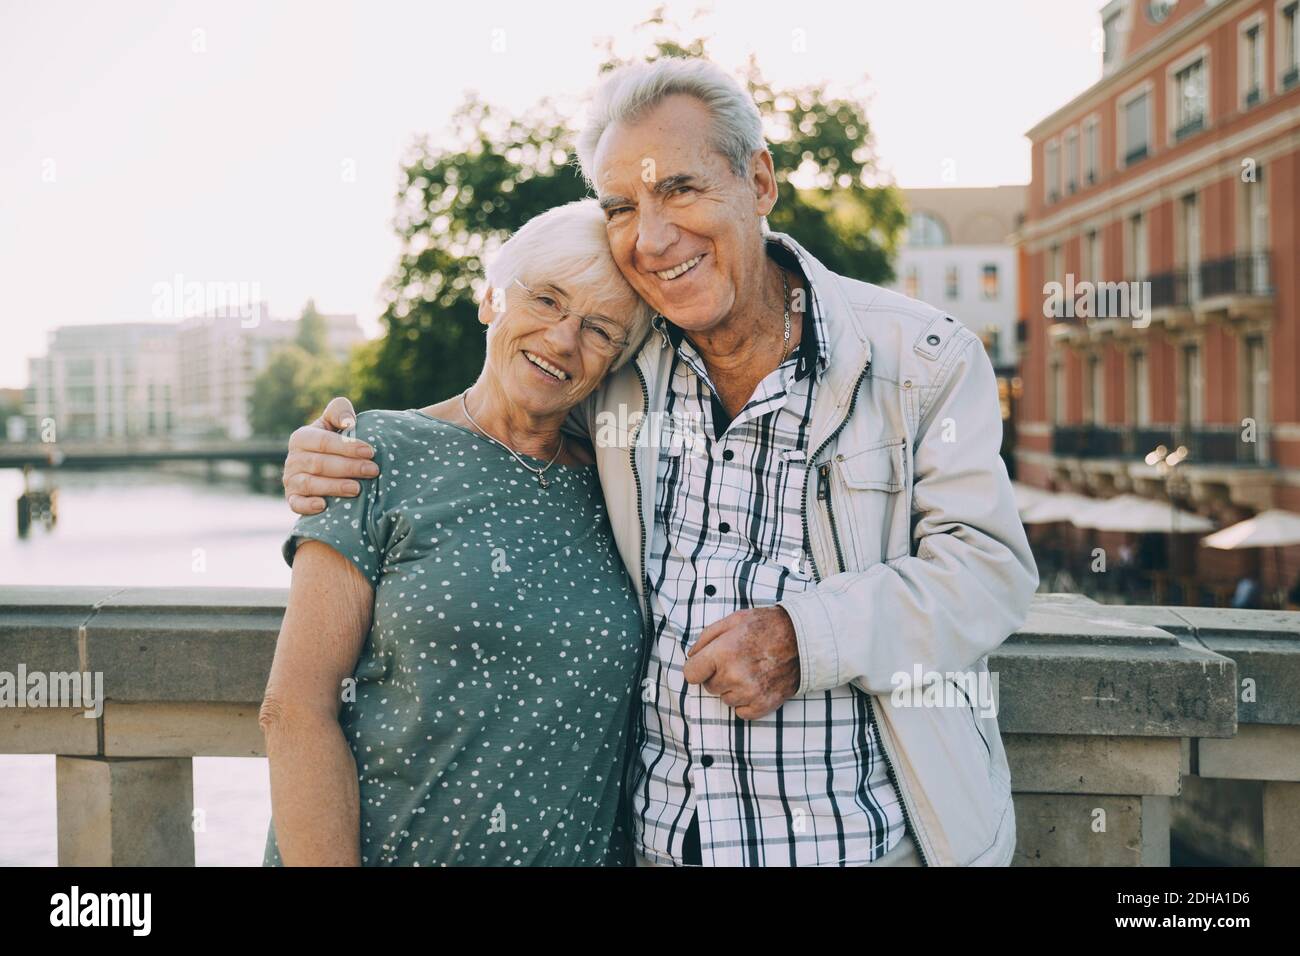 Portrait of smiling senior man arm around standing with partner against railing in city Stock Photo